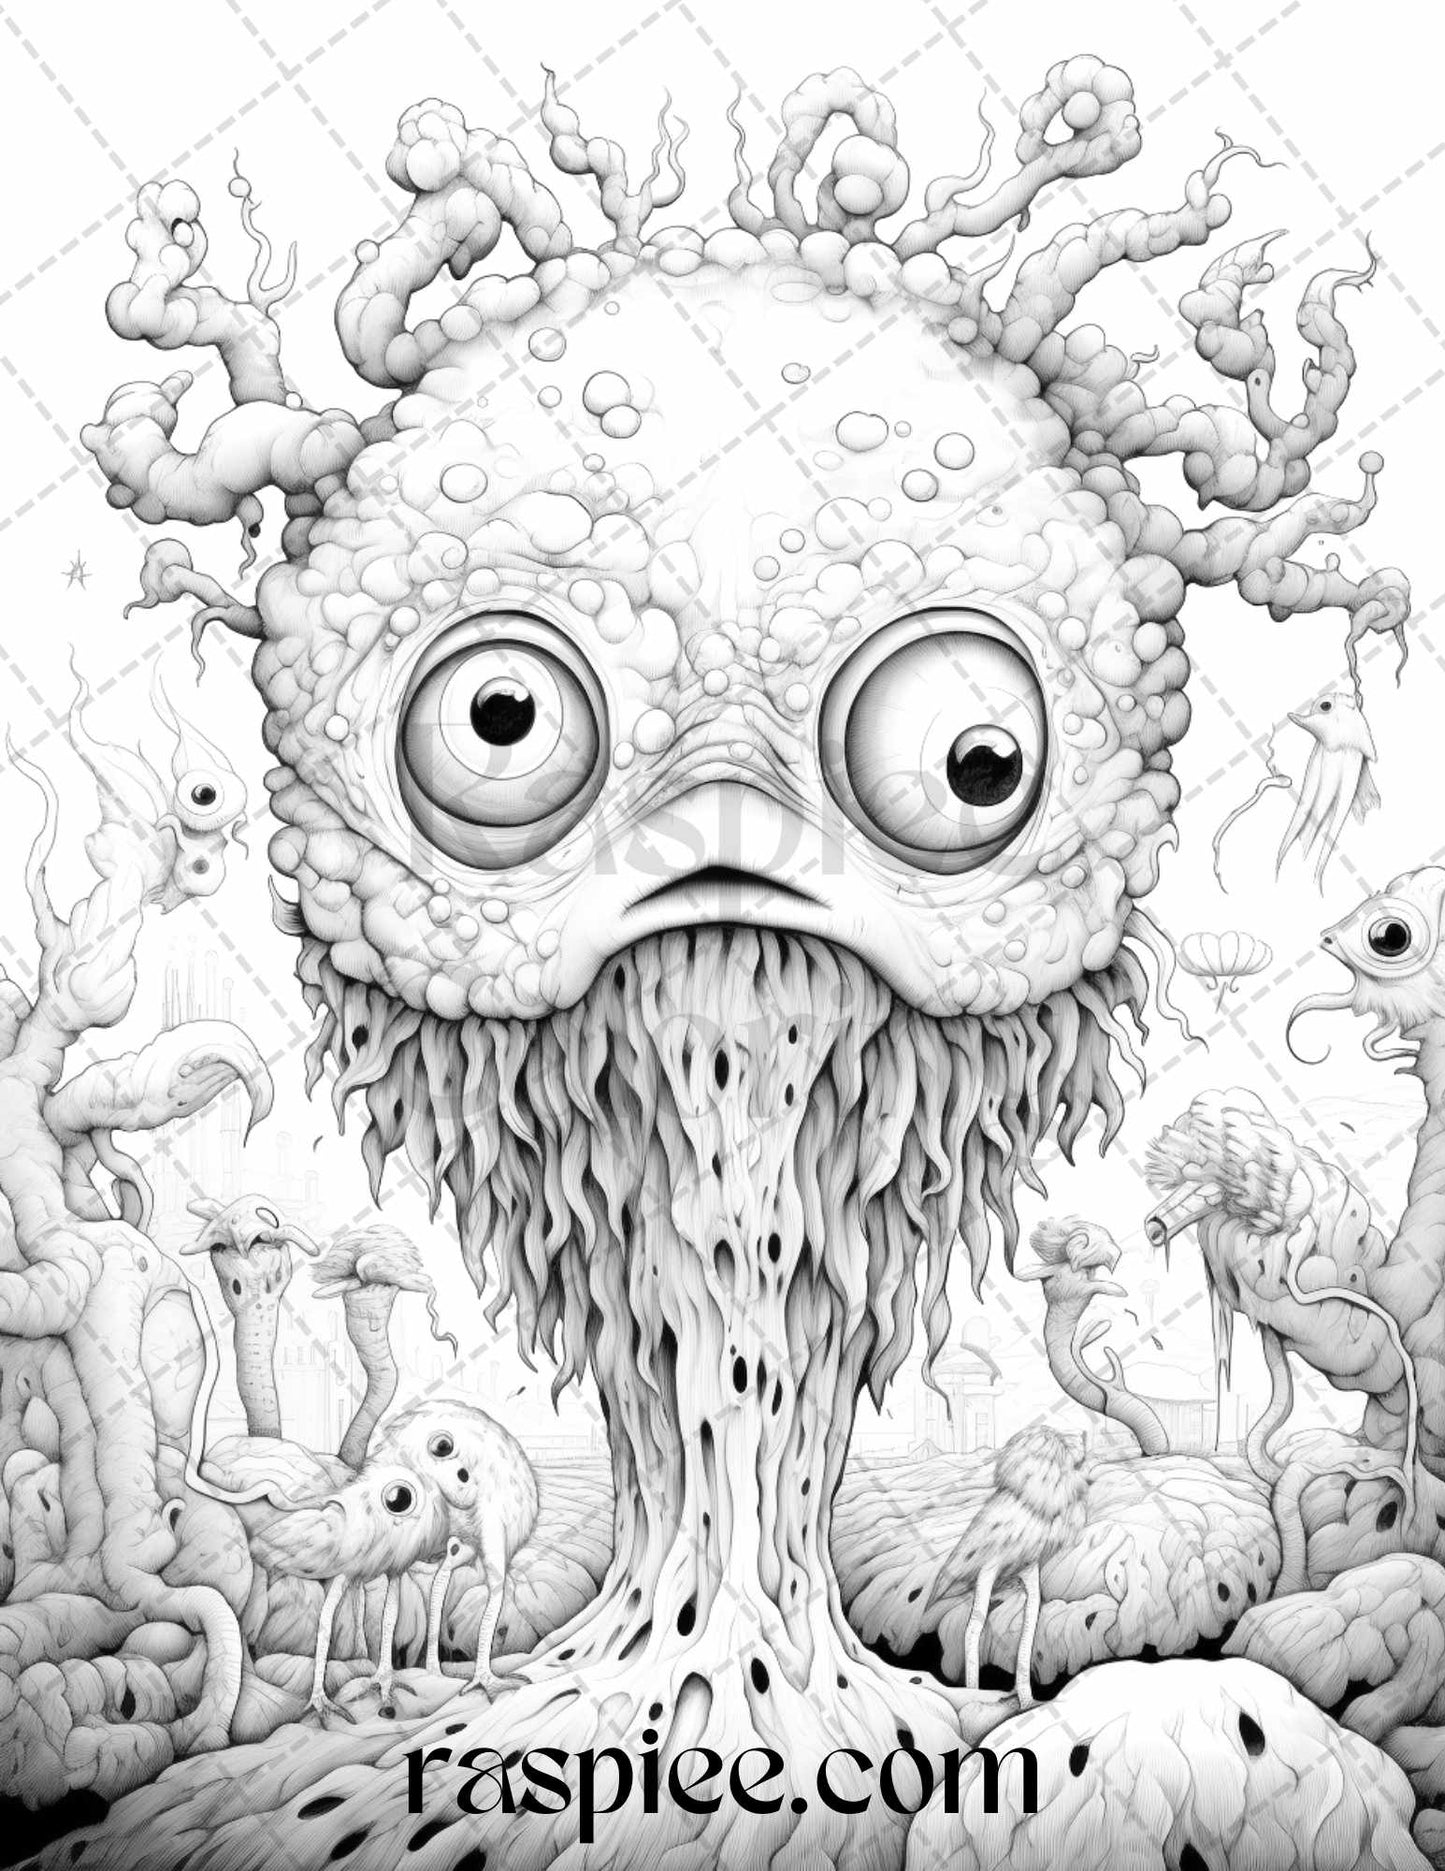 53 Surreal Creatures Grayscale Coloring Pages for Adults, Printable PDF File Instant Download